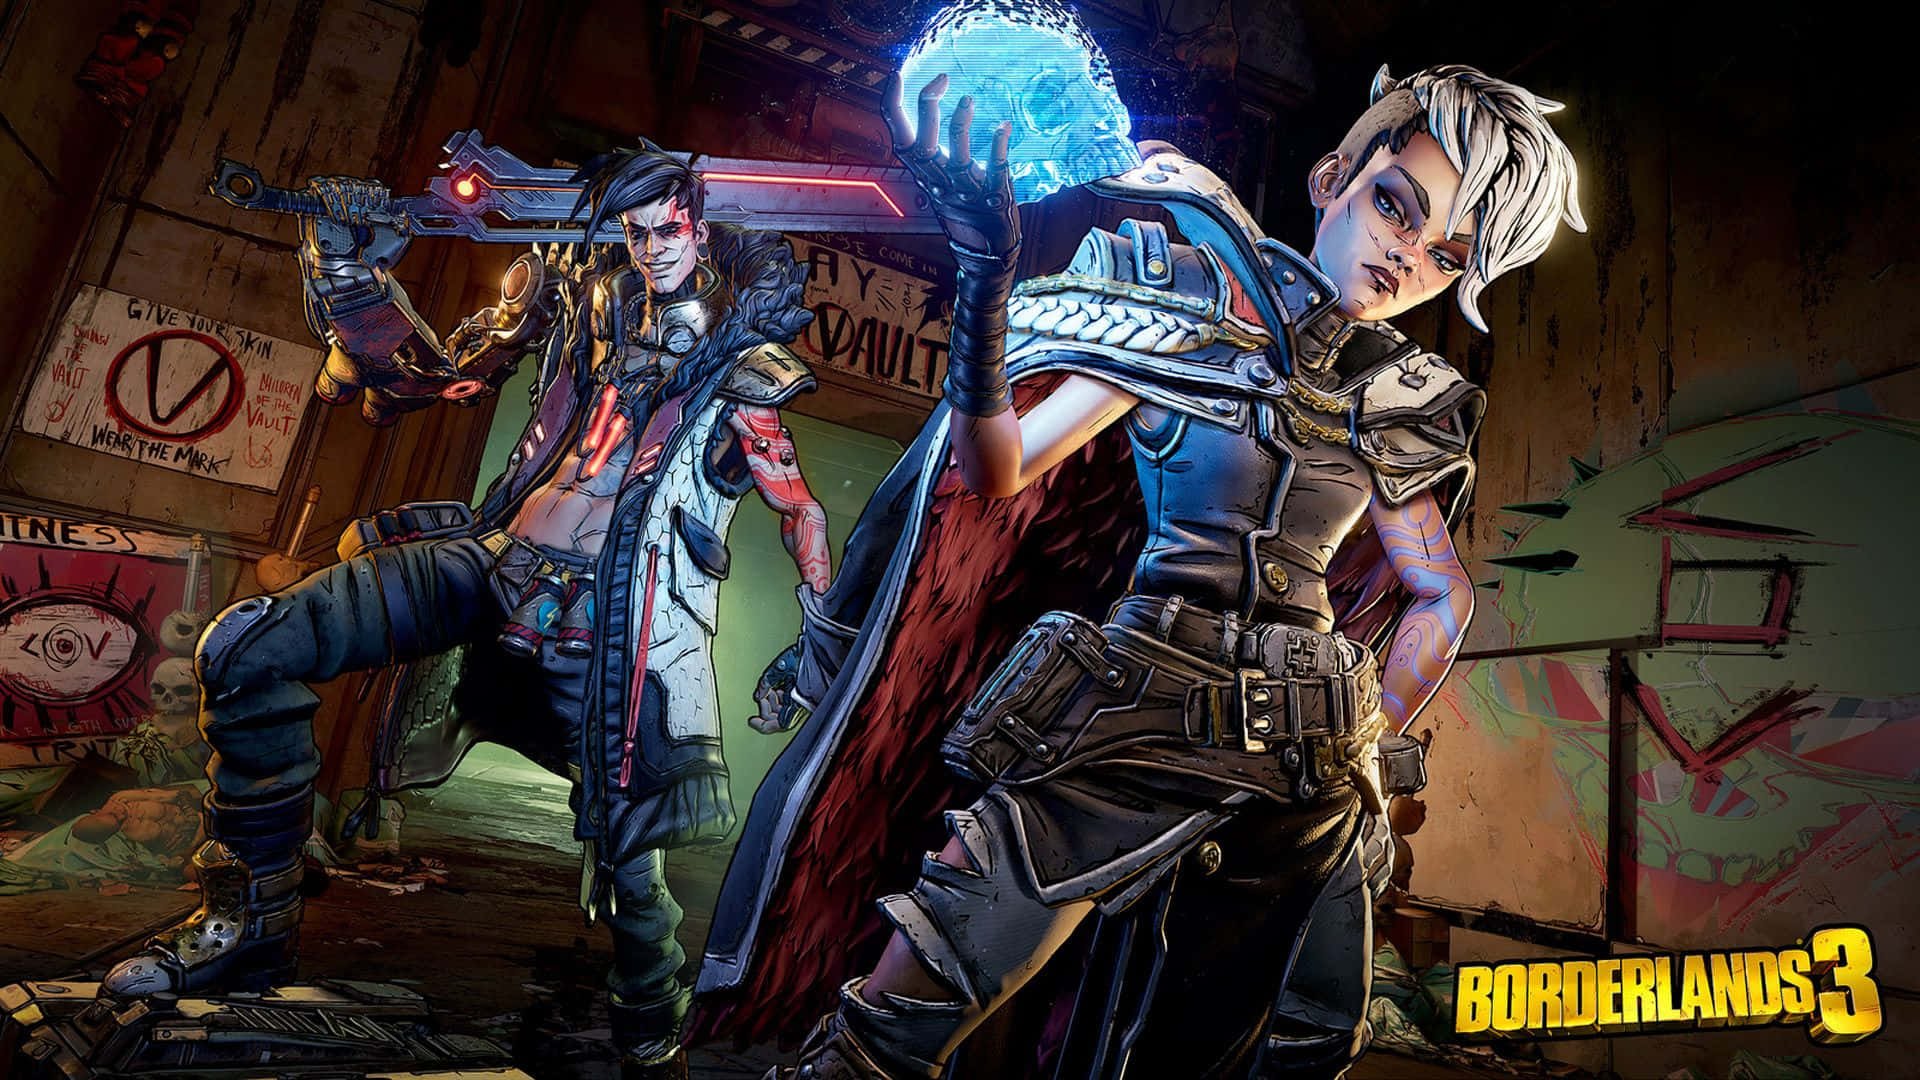 Borderlands 3 Action-Packed Adventure